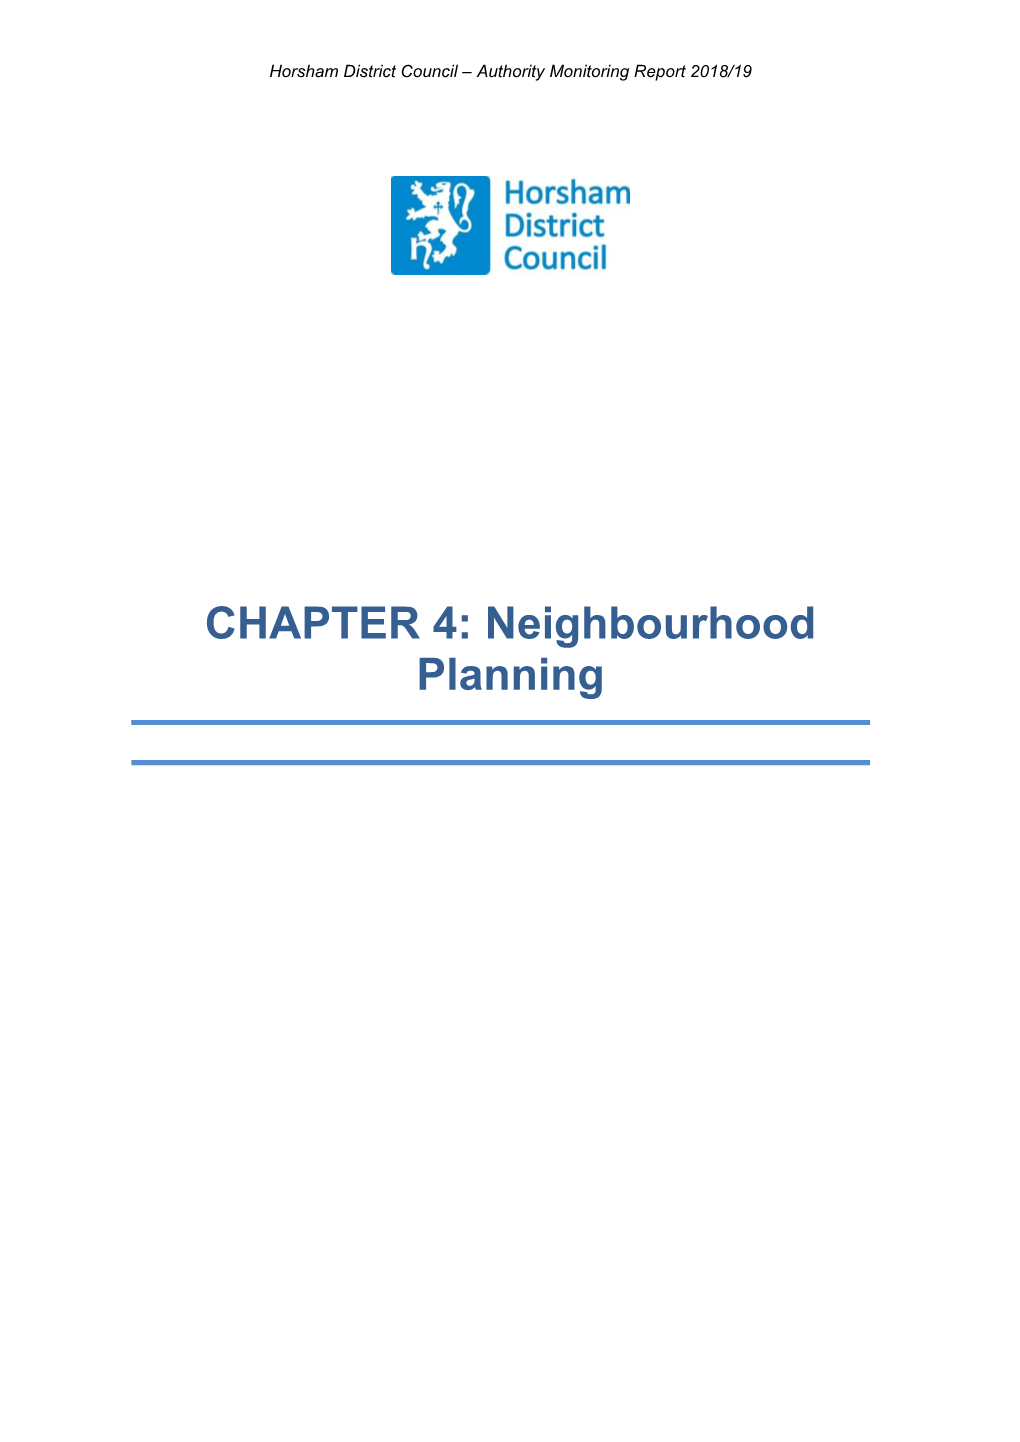 Neighbourhood Planning Horsham District Council – Authority Monitoring Report 2018/19